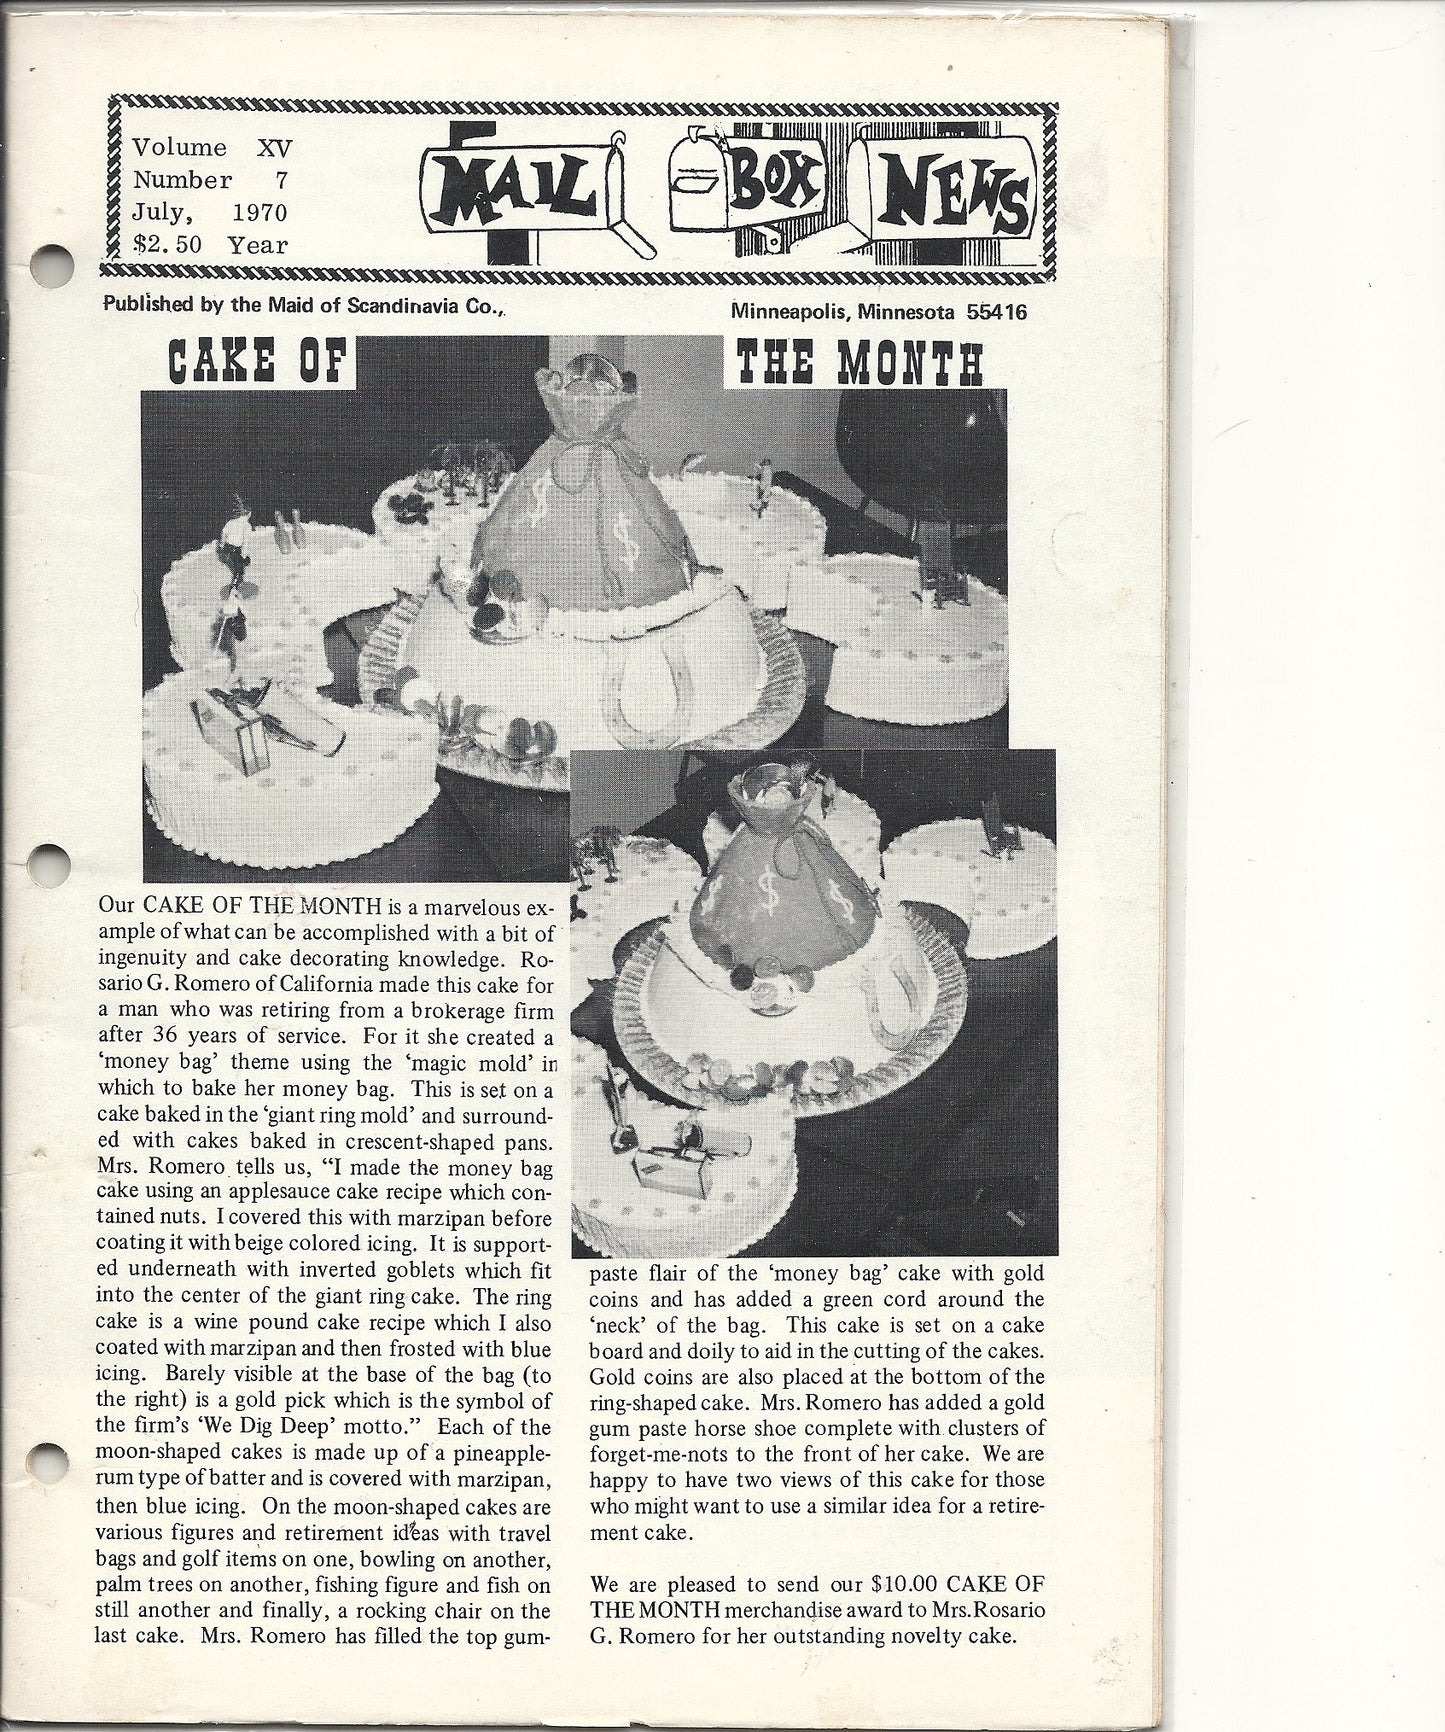 07 00 1970 Mail Box News Cake of the Month